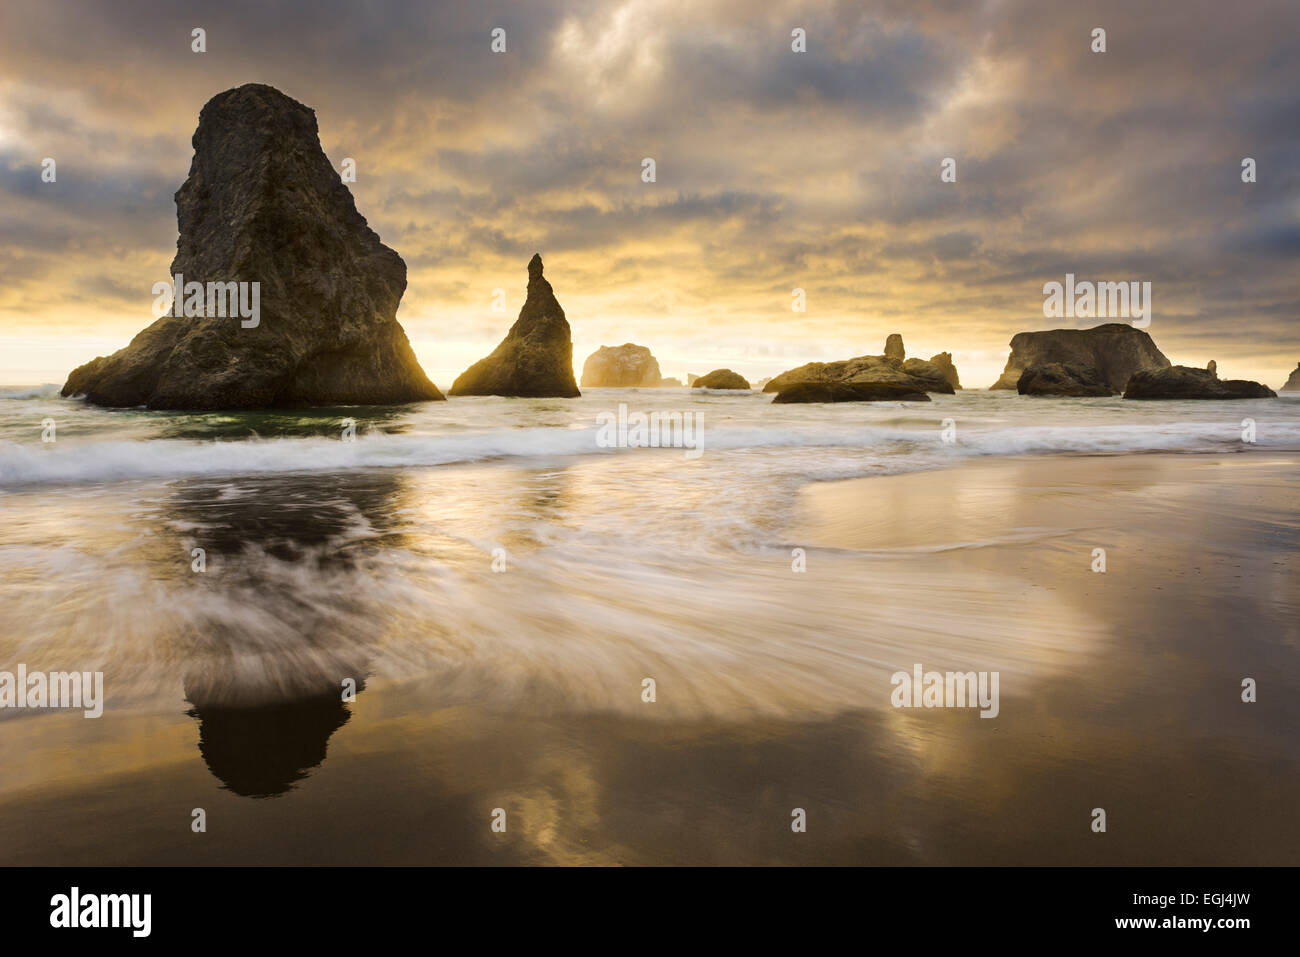 The USA, America, rocks, Bandon, lighting atmosphere, golden, evening, atmosphere, clouds, dramatically, surf, stormy, waves, Stock Photo